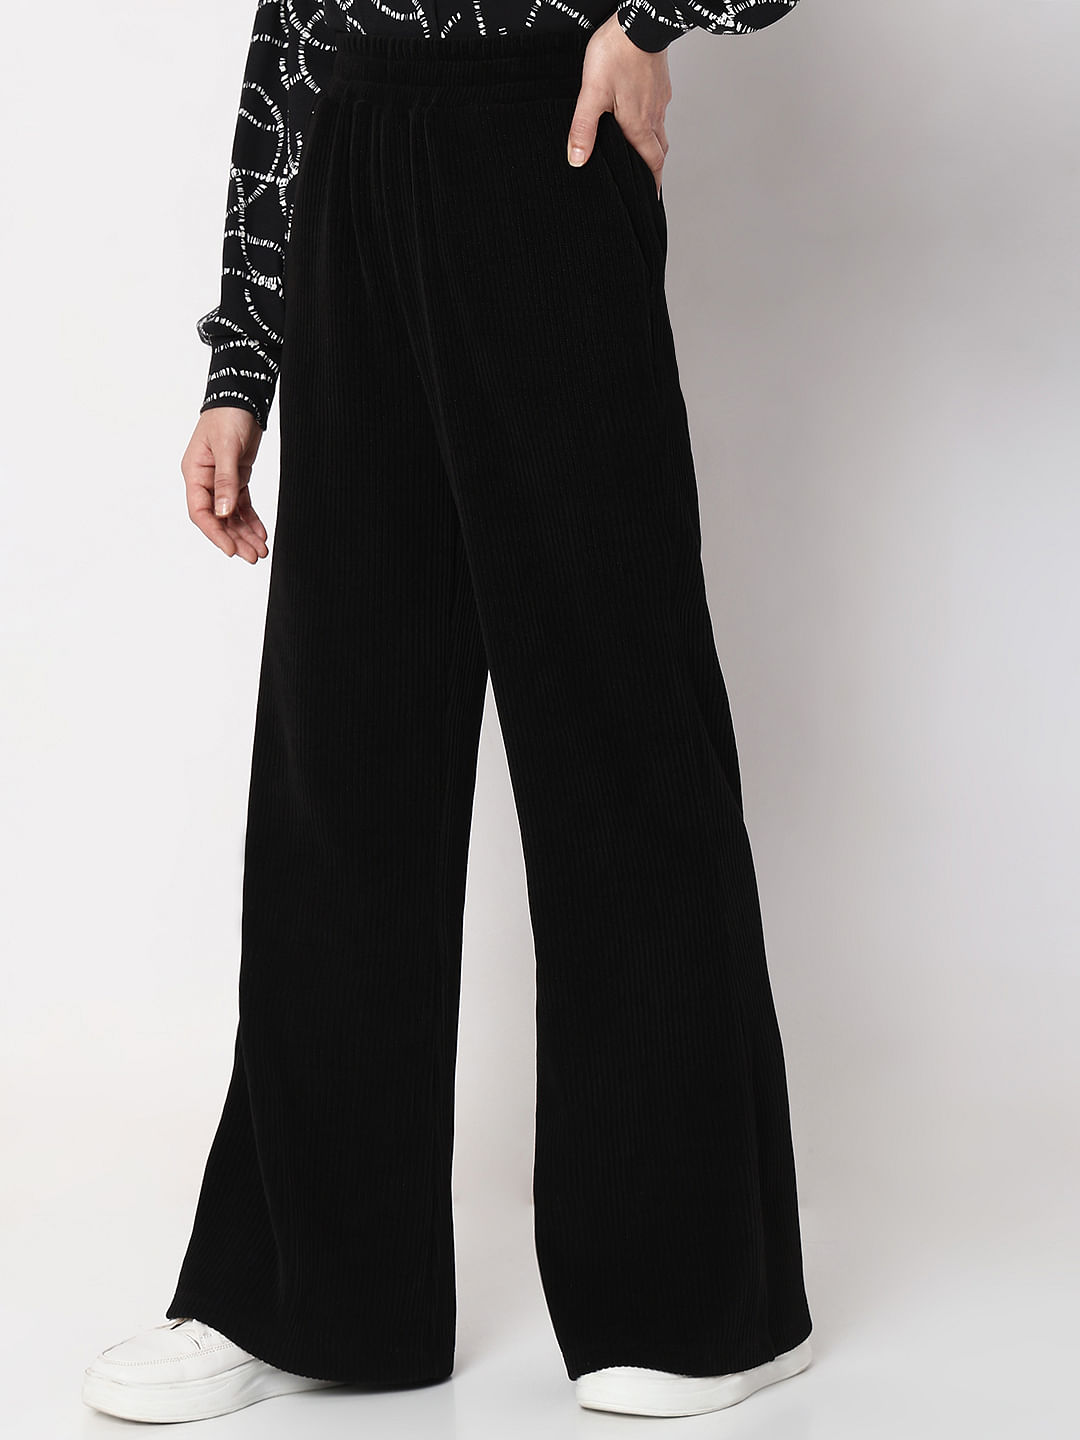 Buy Occasion Black Palazzo Sequin Trousers for Women / Fashion Wide Leg  Trousers / Women Evening Gown Baggy Pants / High Waisted Designer Pants  Online in India - Etsy